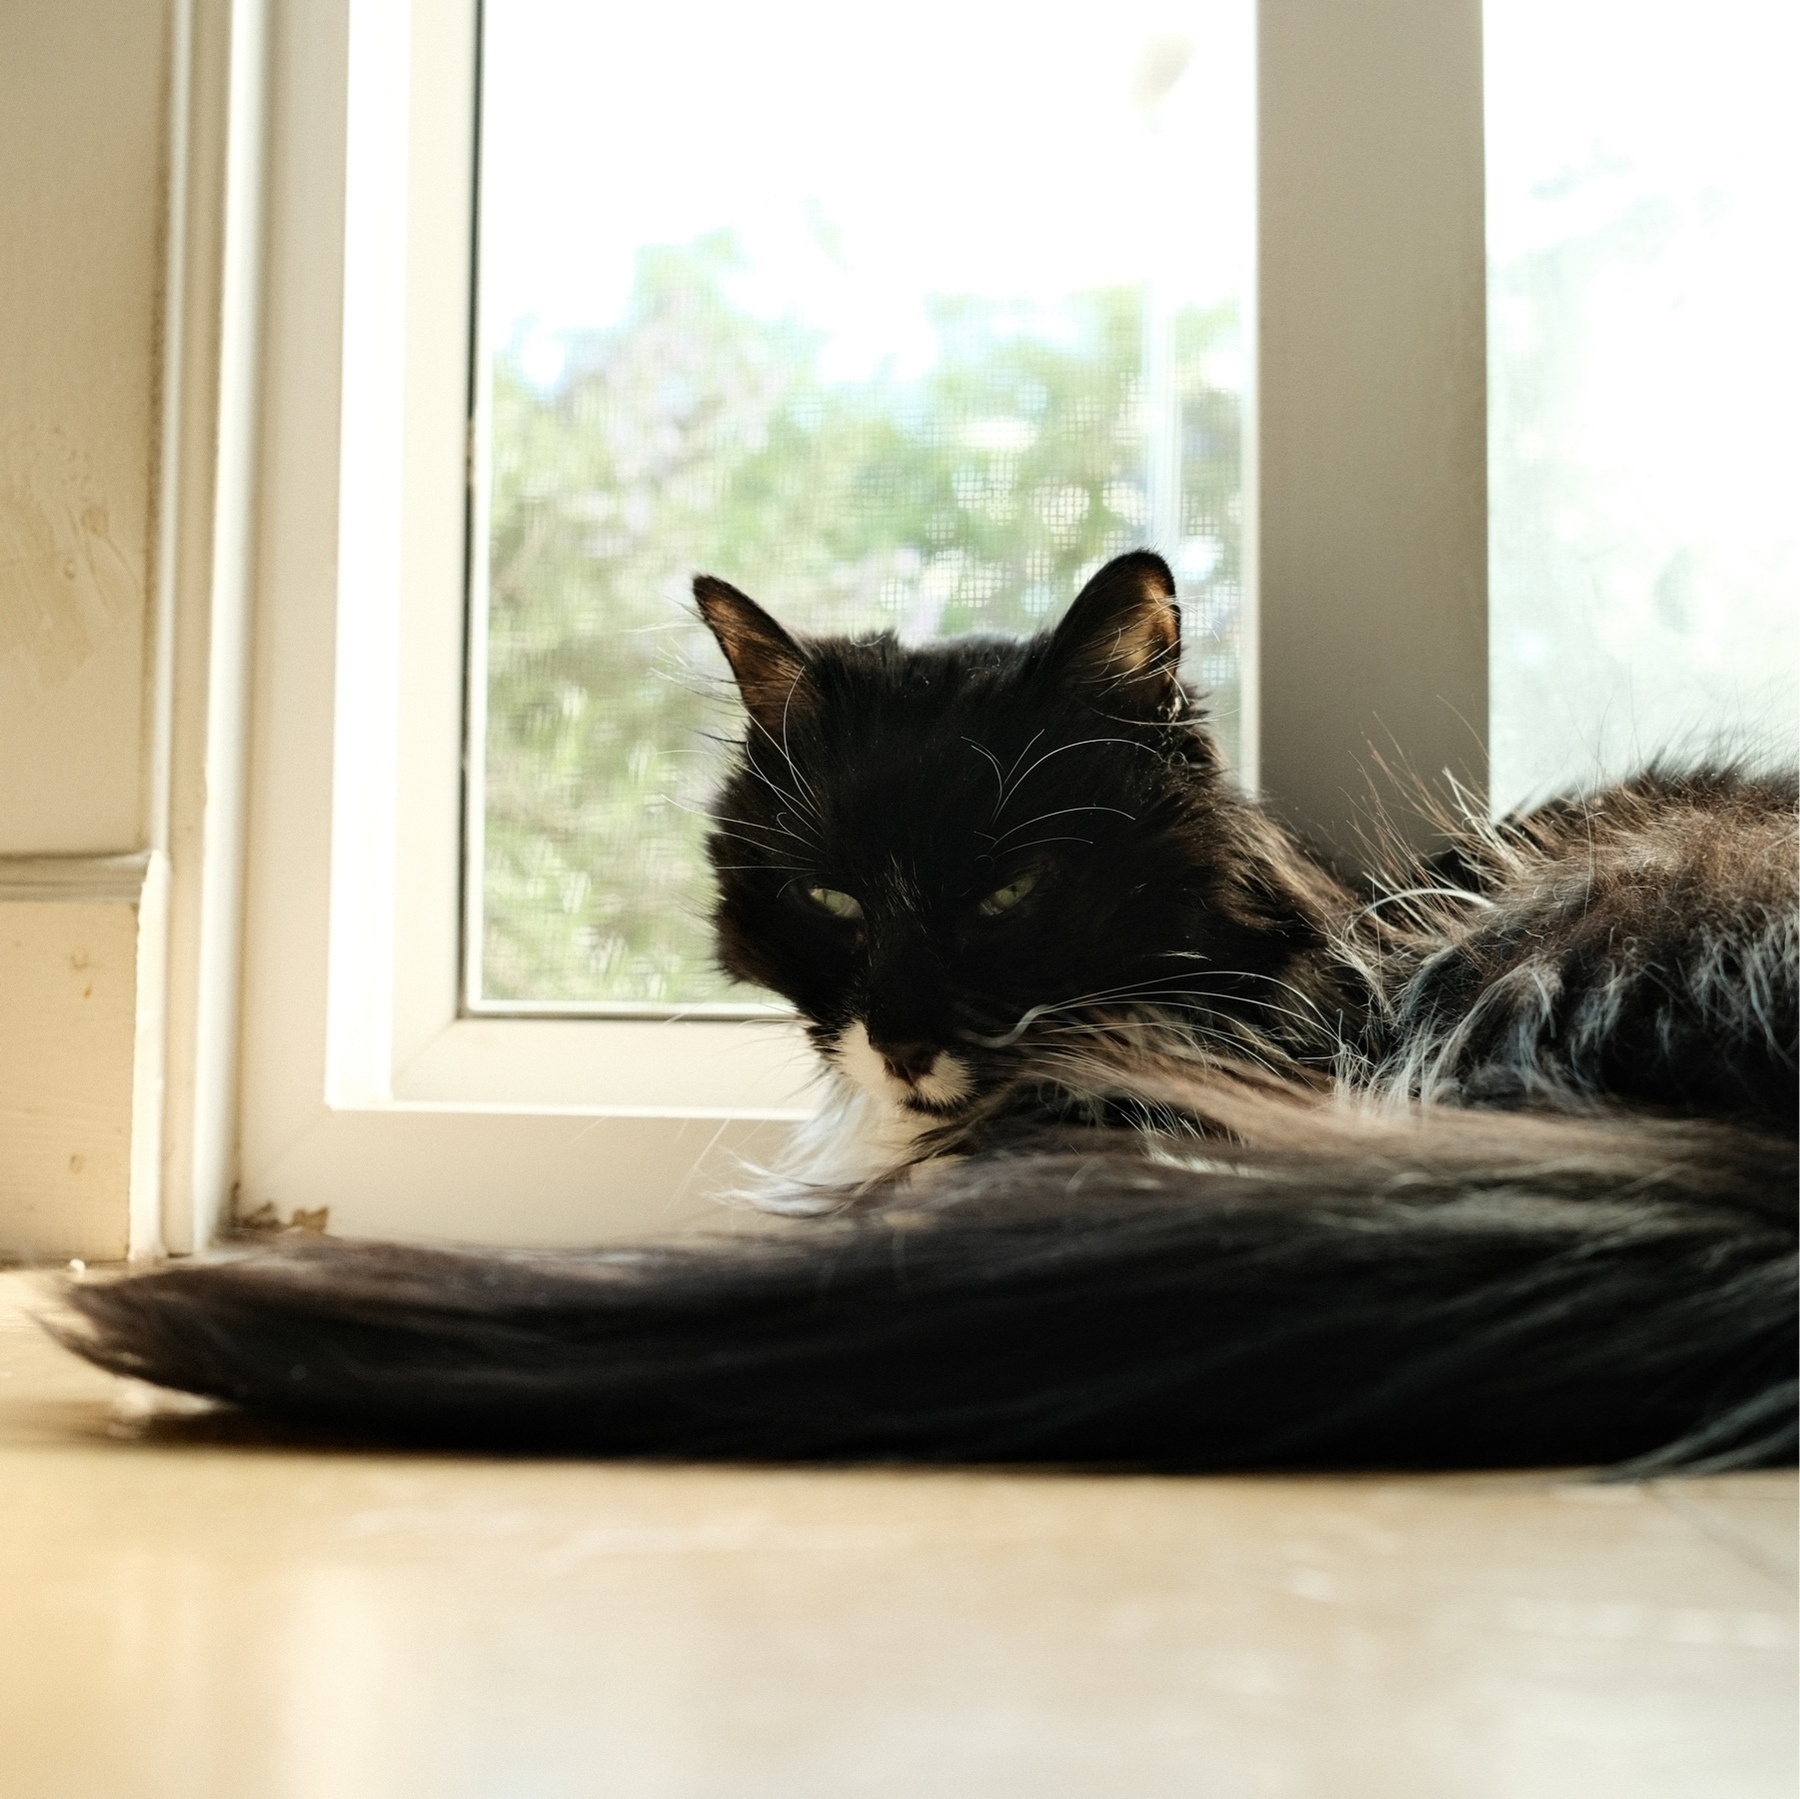 A tuxedo cat laying on a hard floor in front of an open sloding glass door. The cat is enjoying the fresh air coming through a screen. it's bright outside with blurred grern foliage.